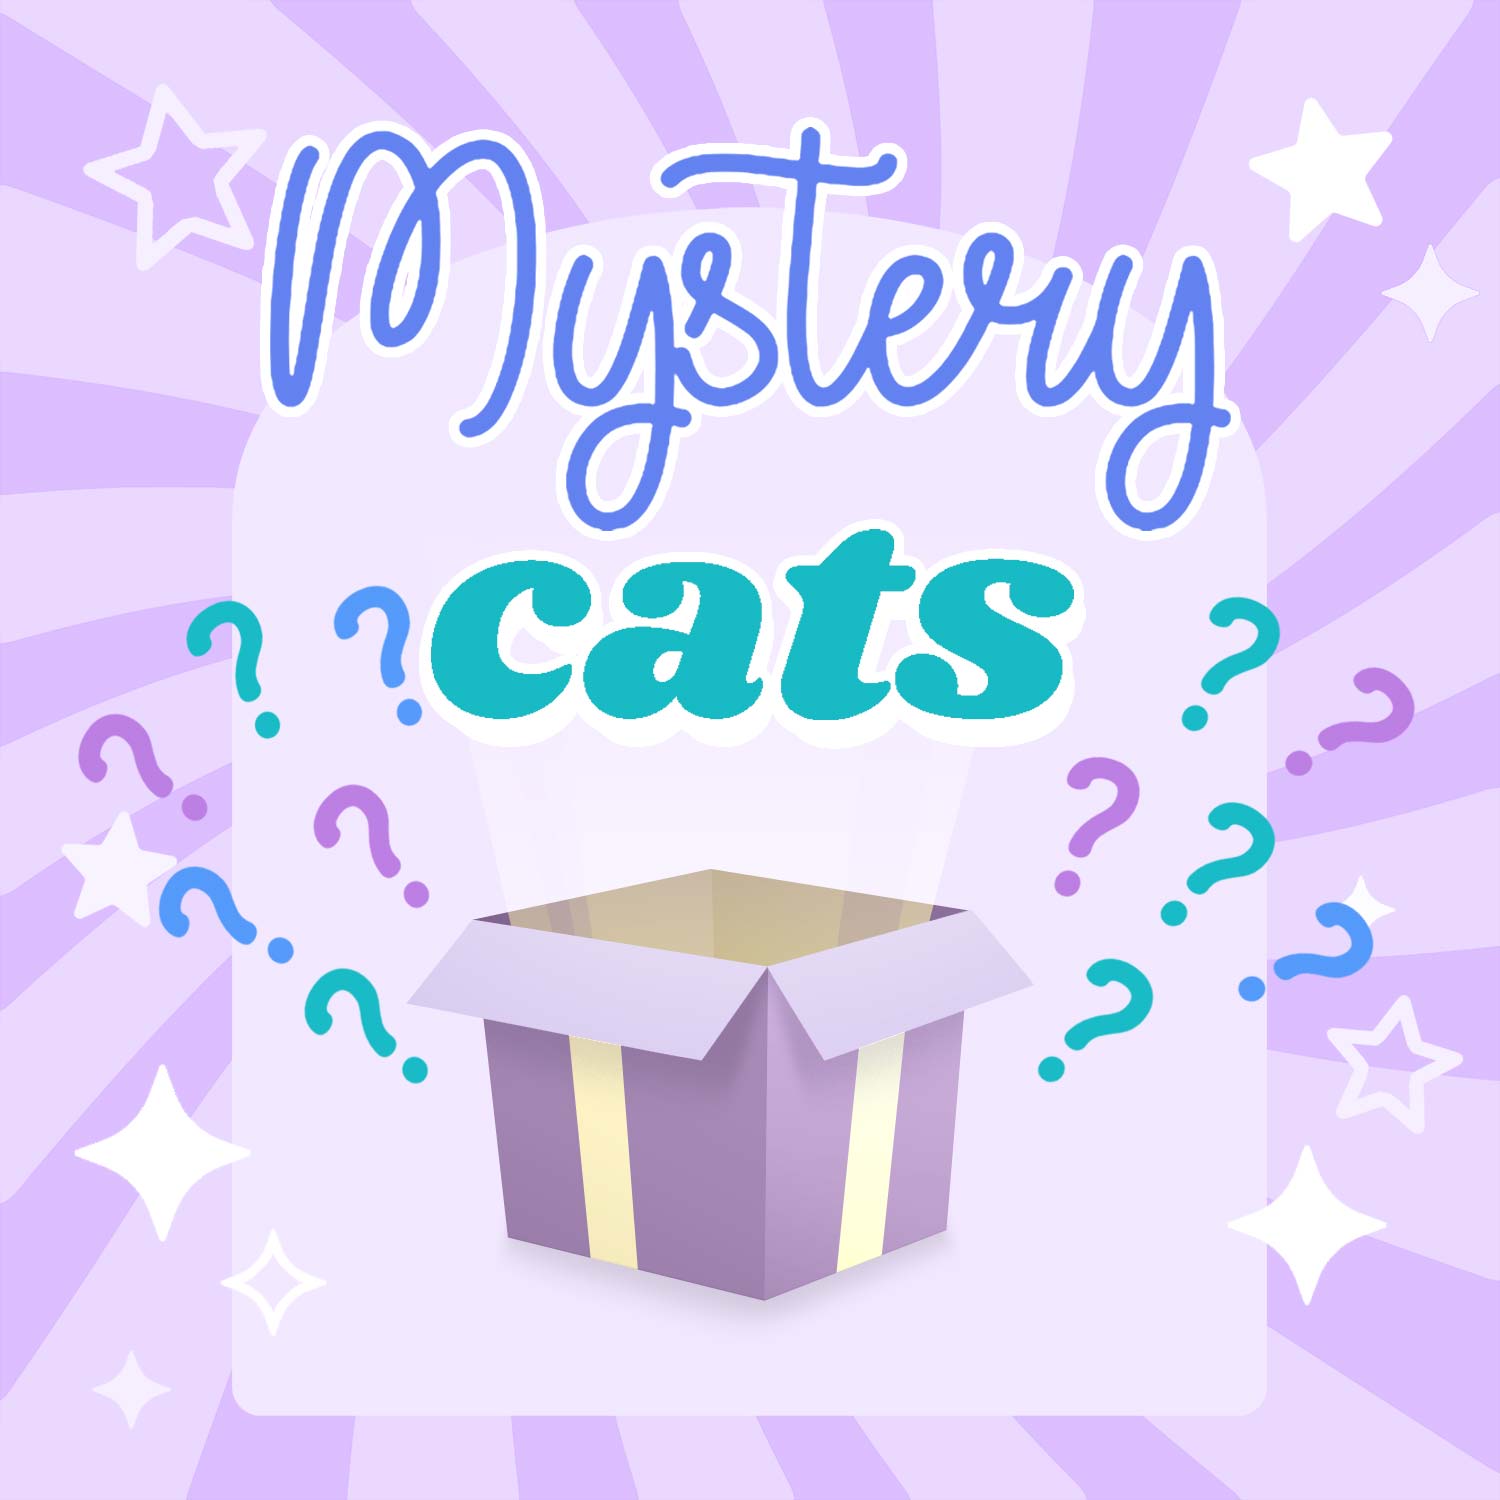 Mystery Cat 3-Pack Brooches & Lapel Pins Flair Fighter   